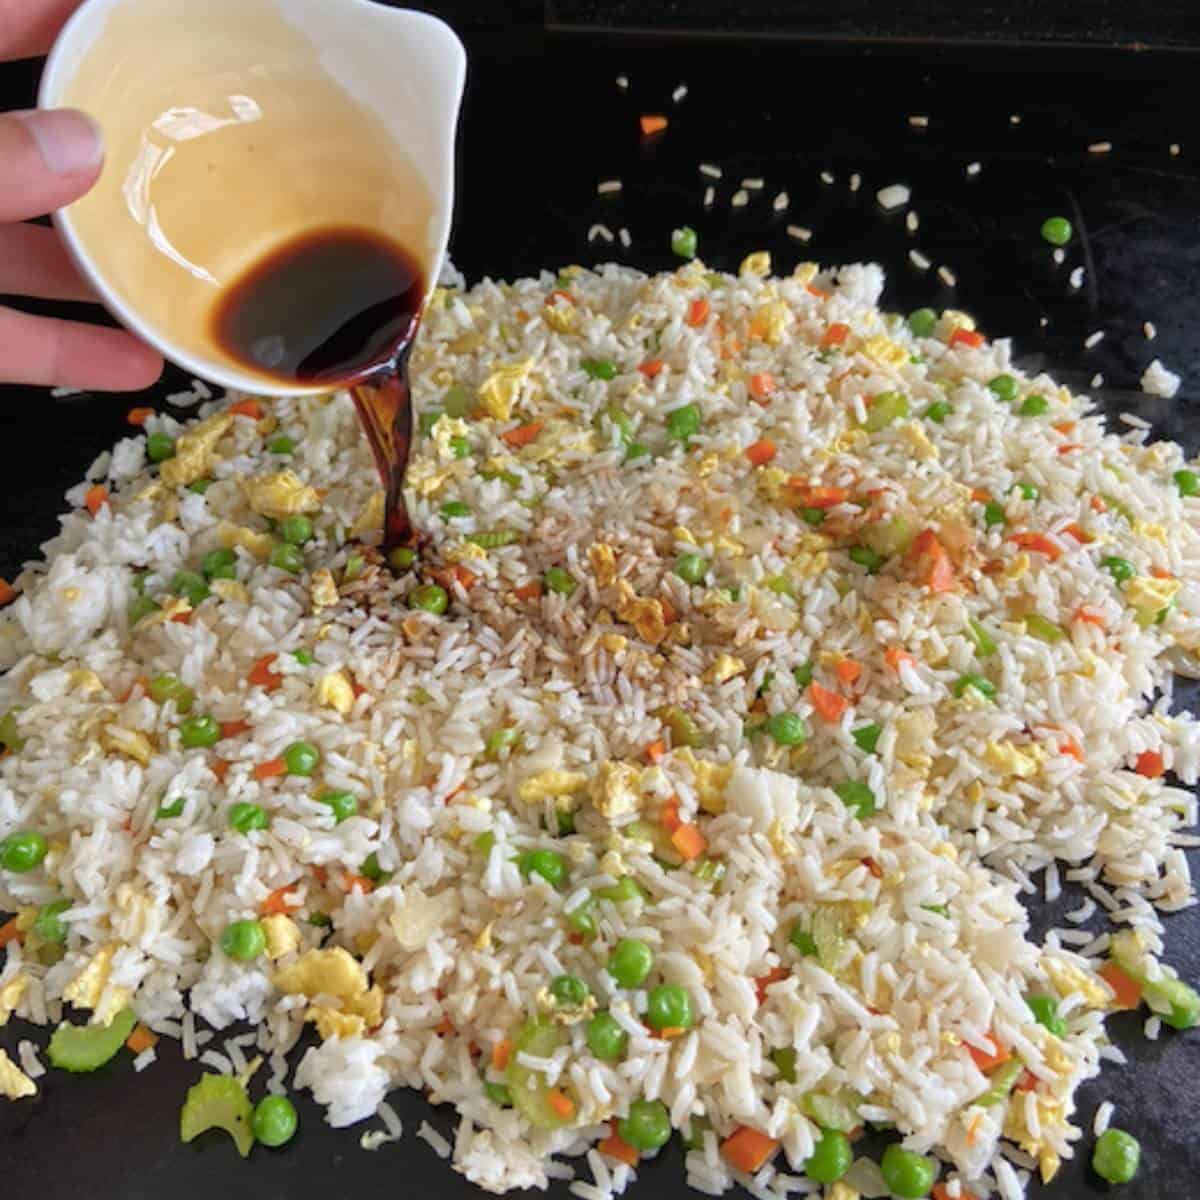 Hand pouring soy sauce over fried rice.